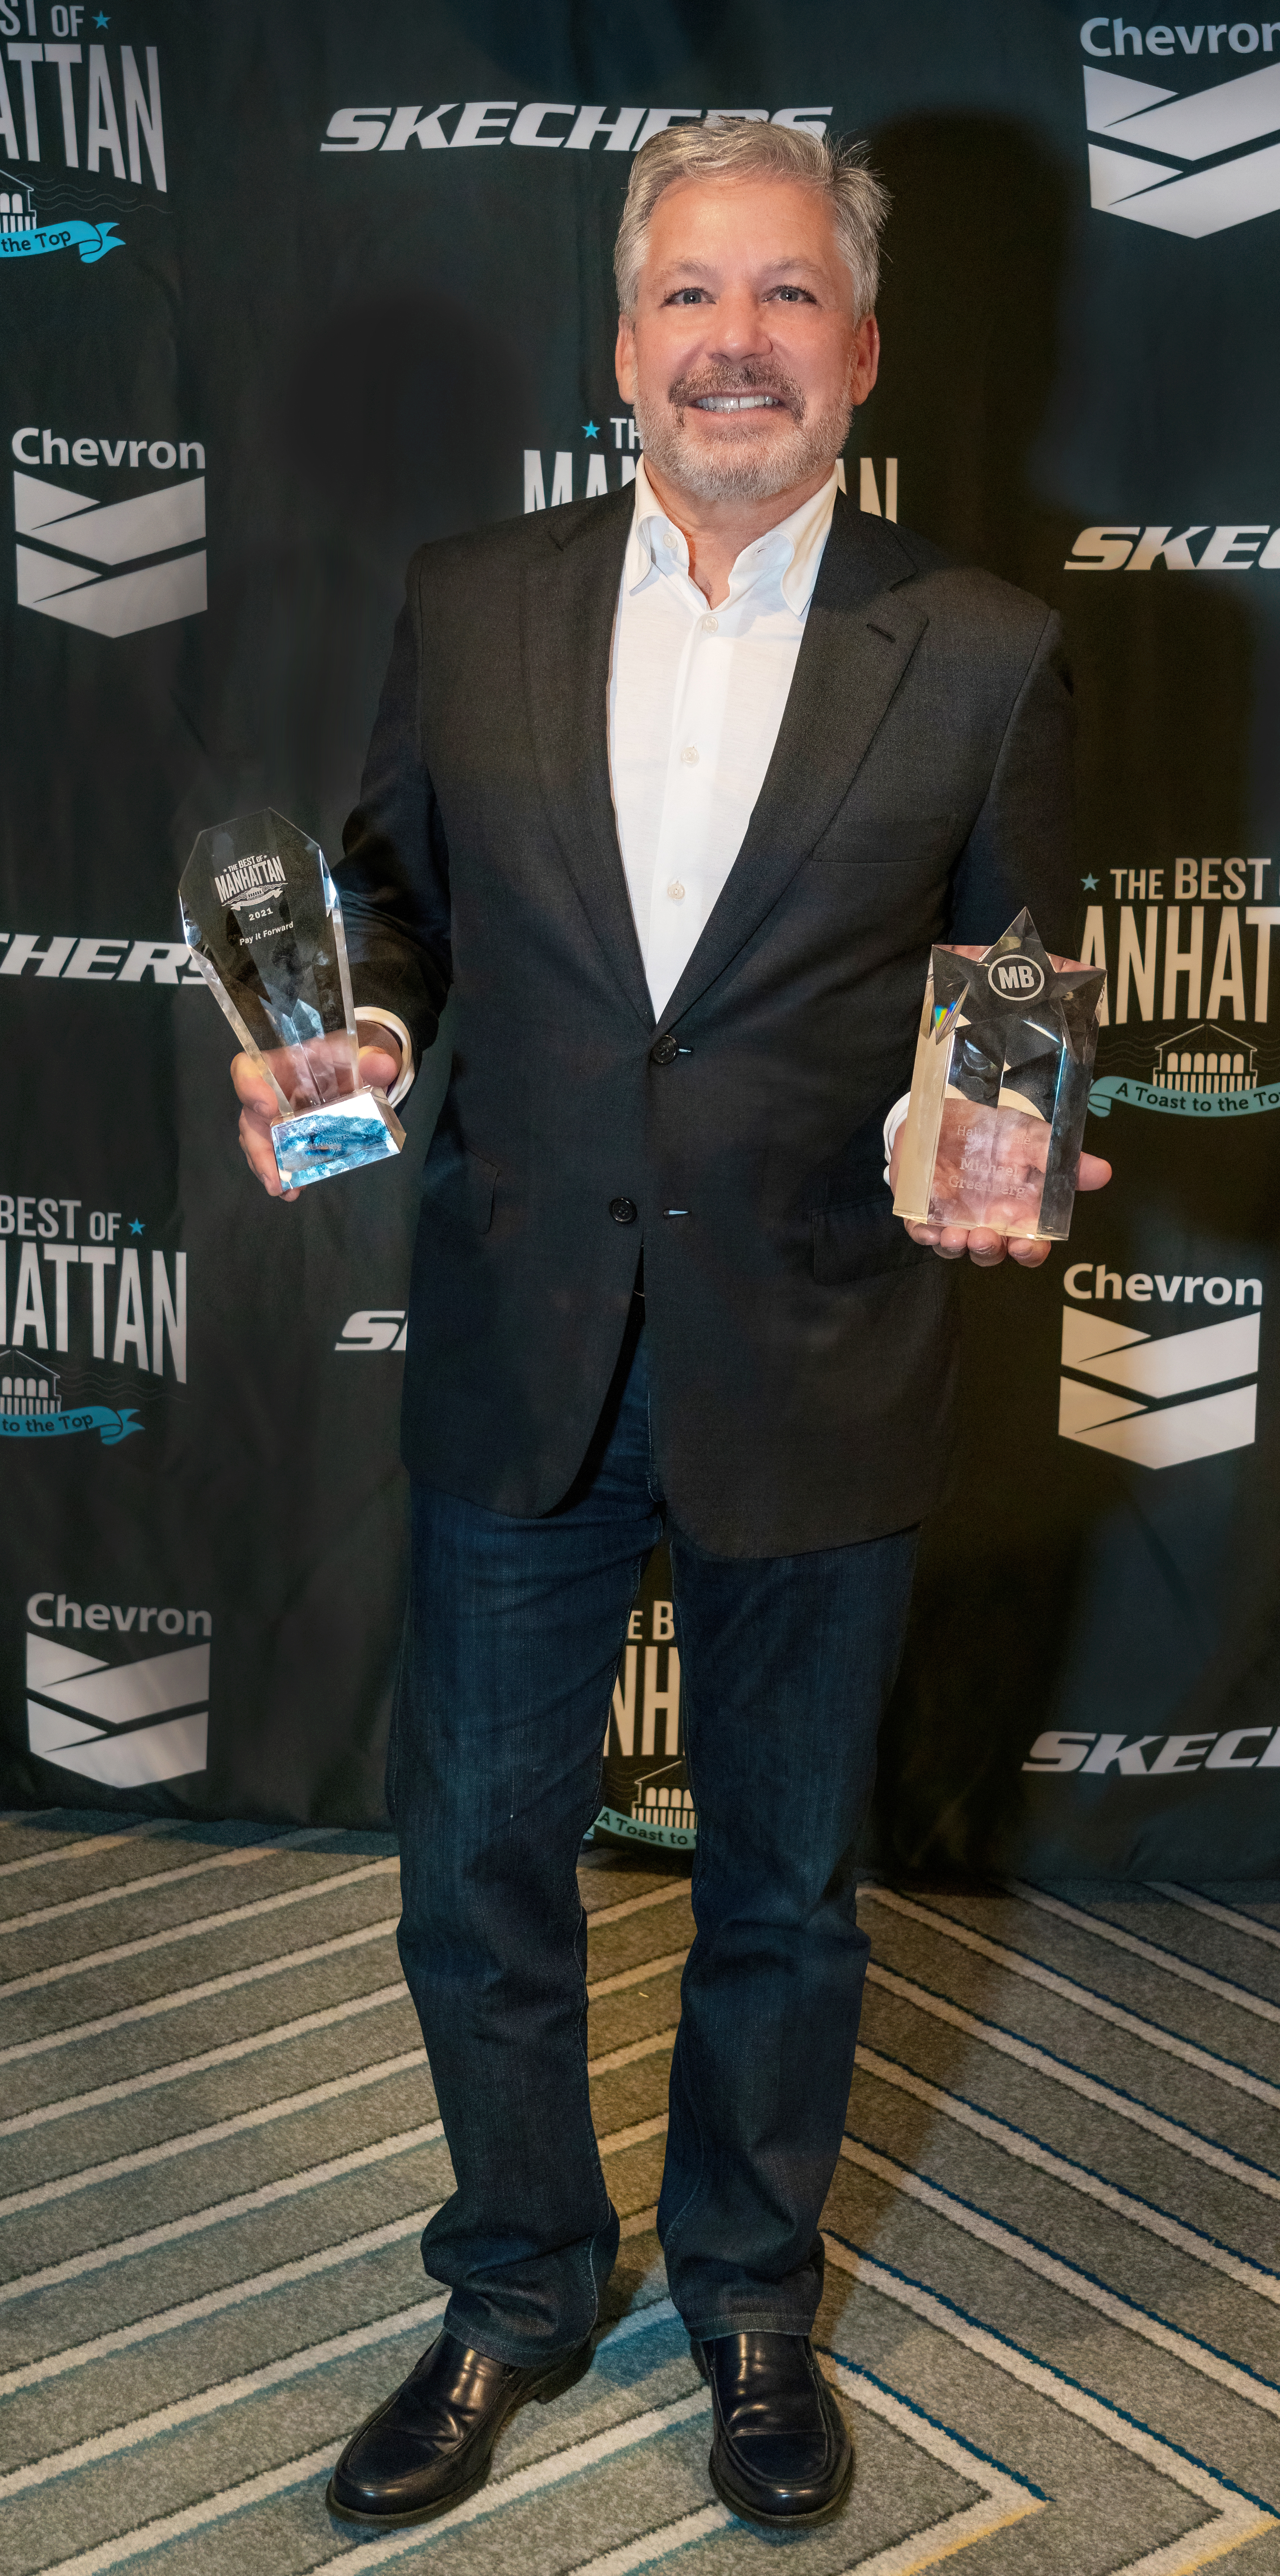 Afwijzen Zonder hoofd stok Skechers President Michael Greenberg Is Inducted Into Best of Manhattan's  Hall of Fame and Skechers Wins “Pay It Forward” Award | Business Wire